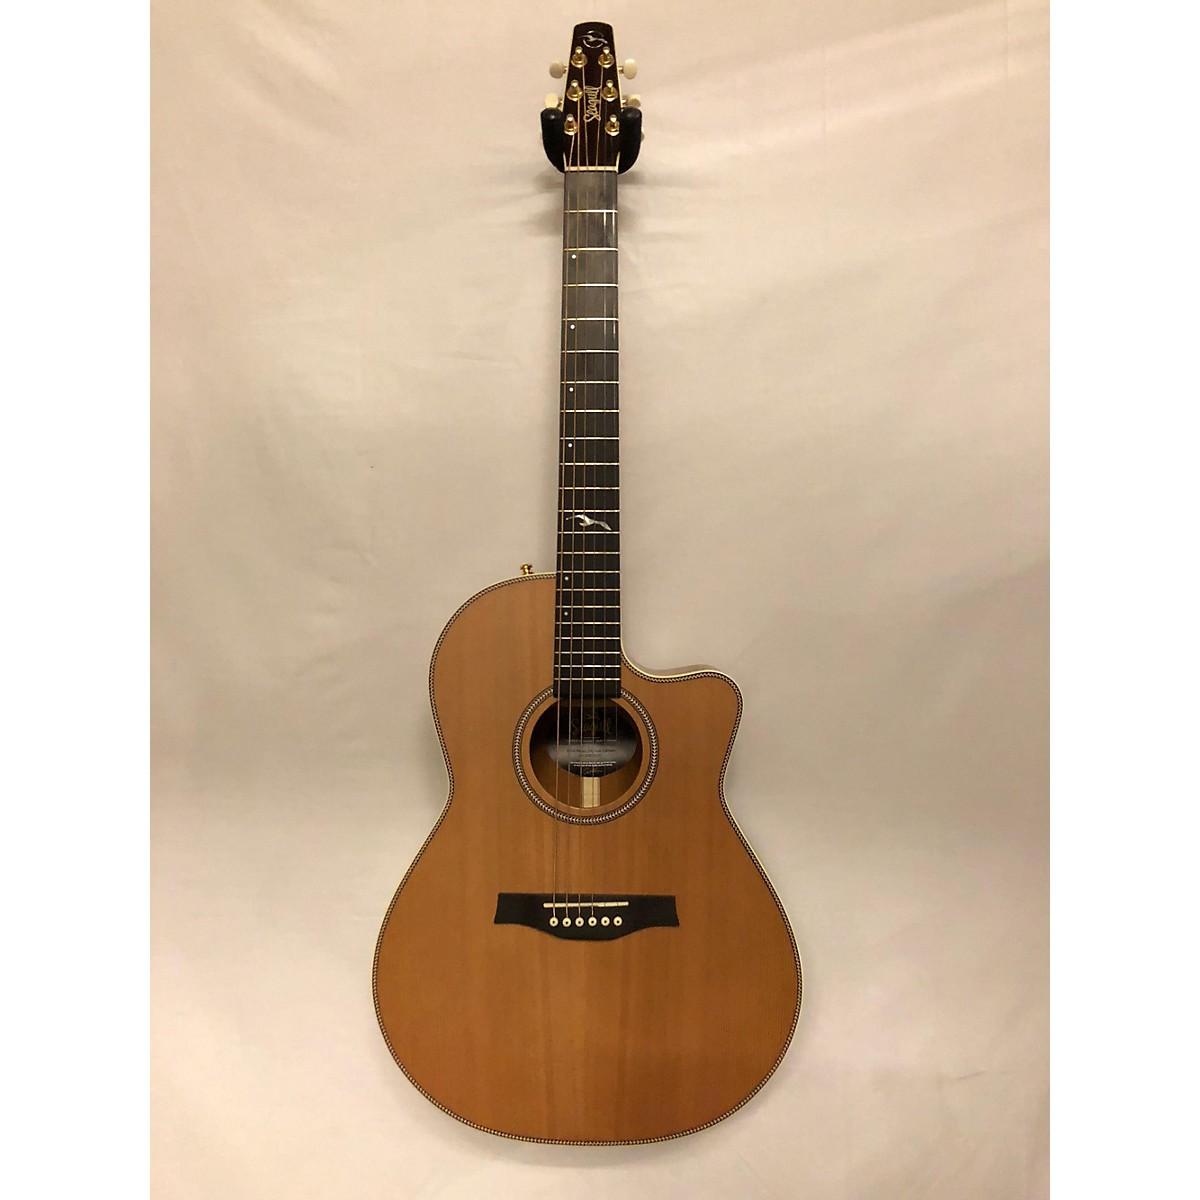 Used Seagull Artist Mosaic CW Acoustic Guitar Guitar Center